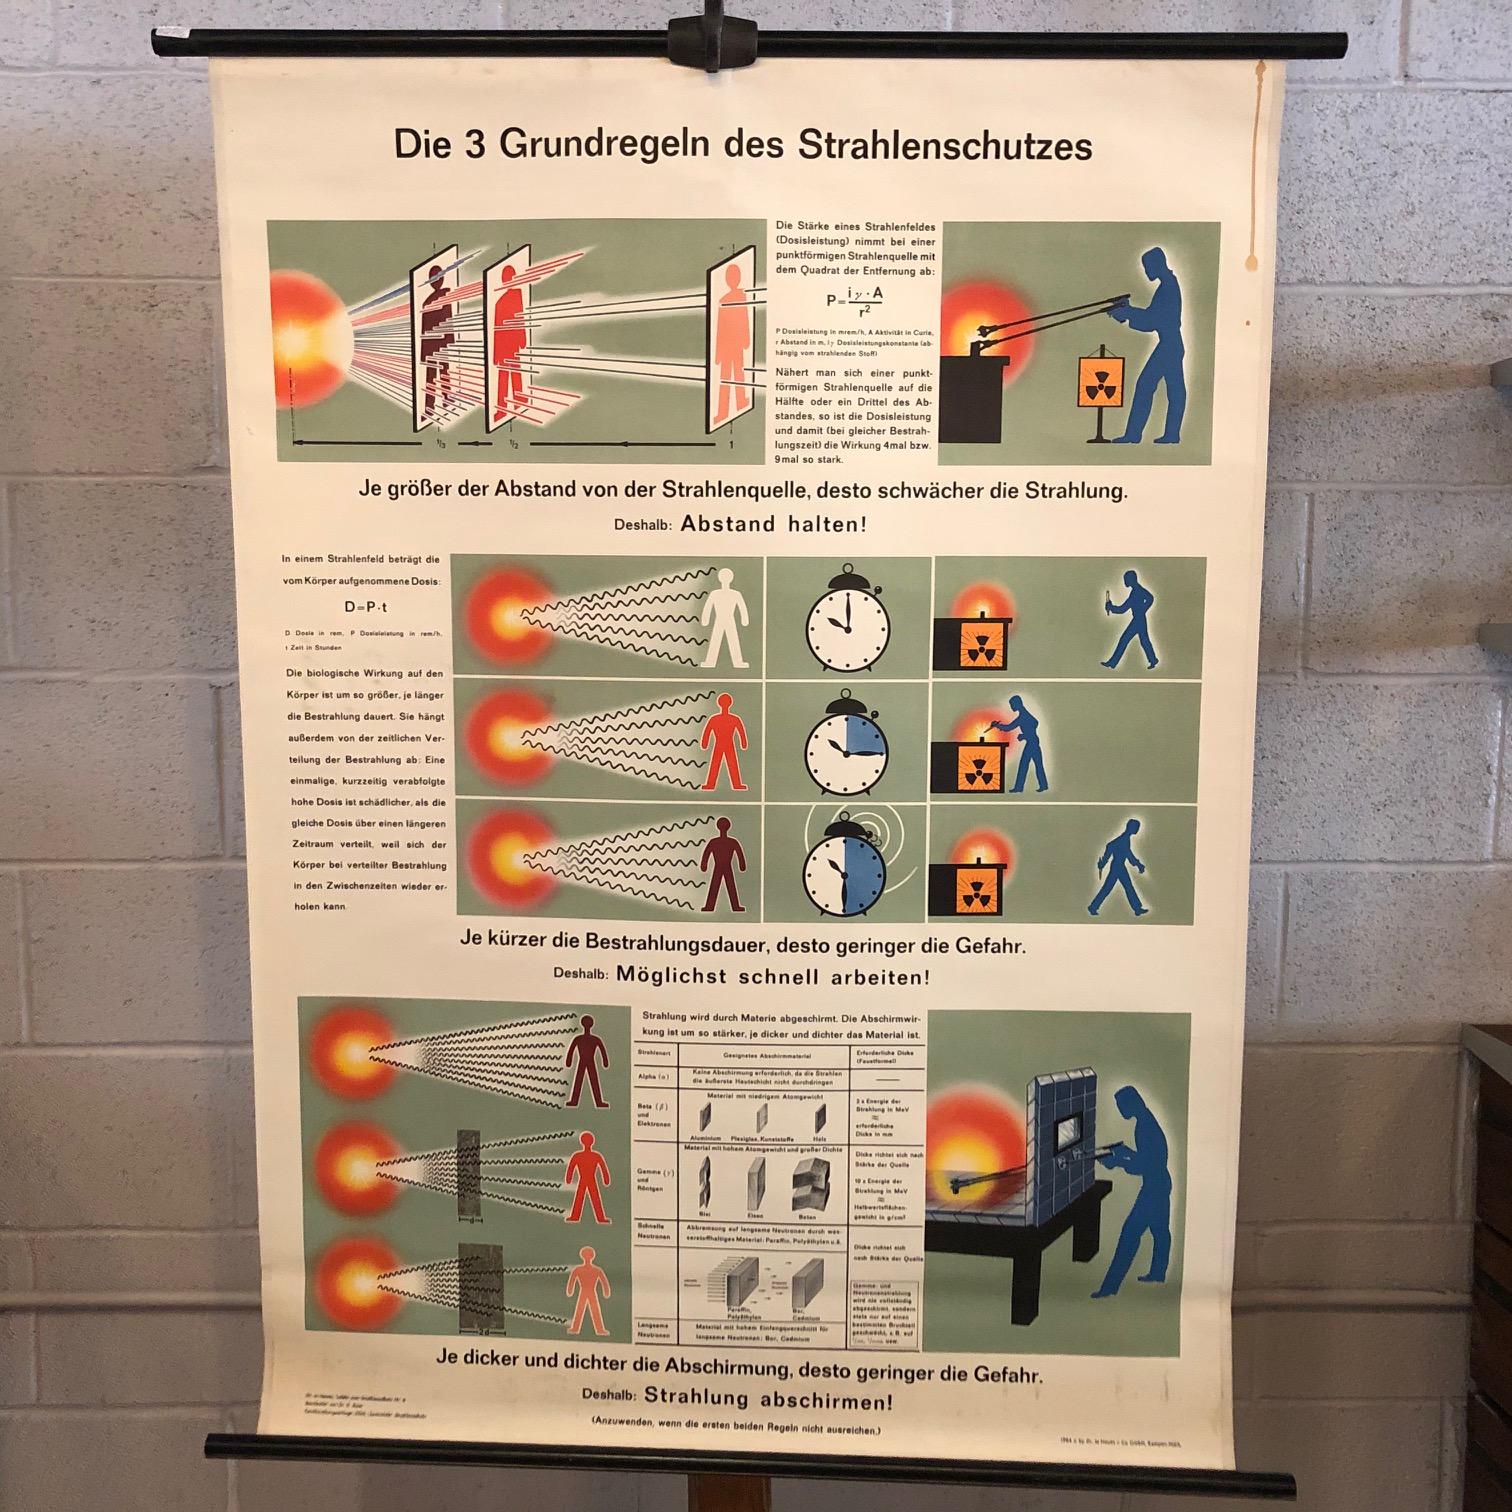 German, scientific, educational, roll-up chart depicting the 3 basic rules of radiation protection is printed on canvas backed paper with .75 inch diameter, painted wooden dowels with black cotton suspension string for hanging.
   